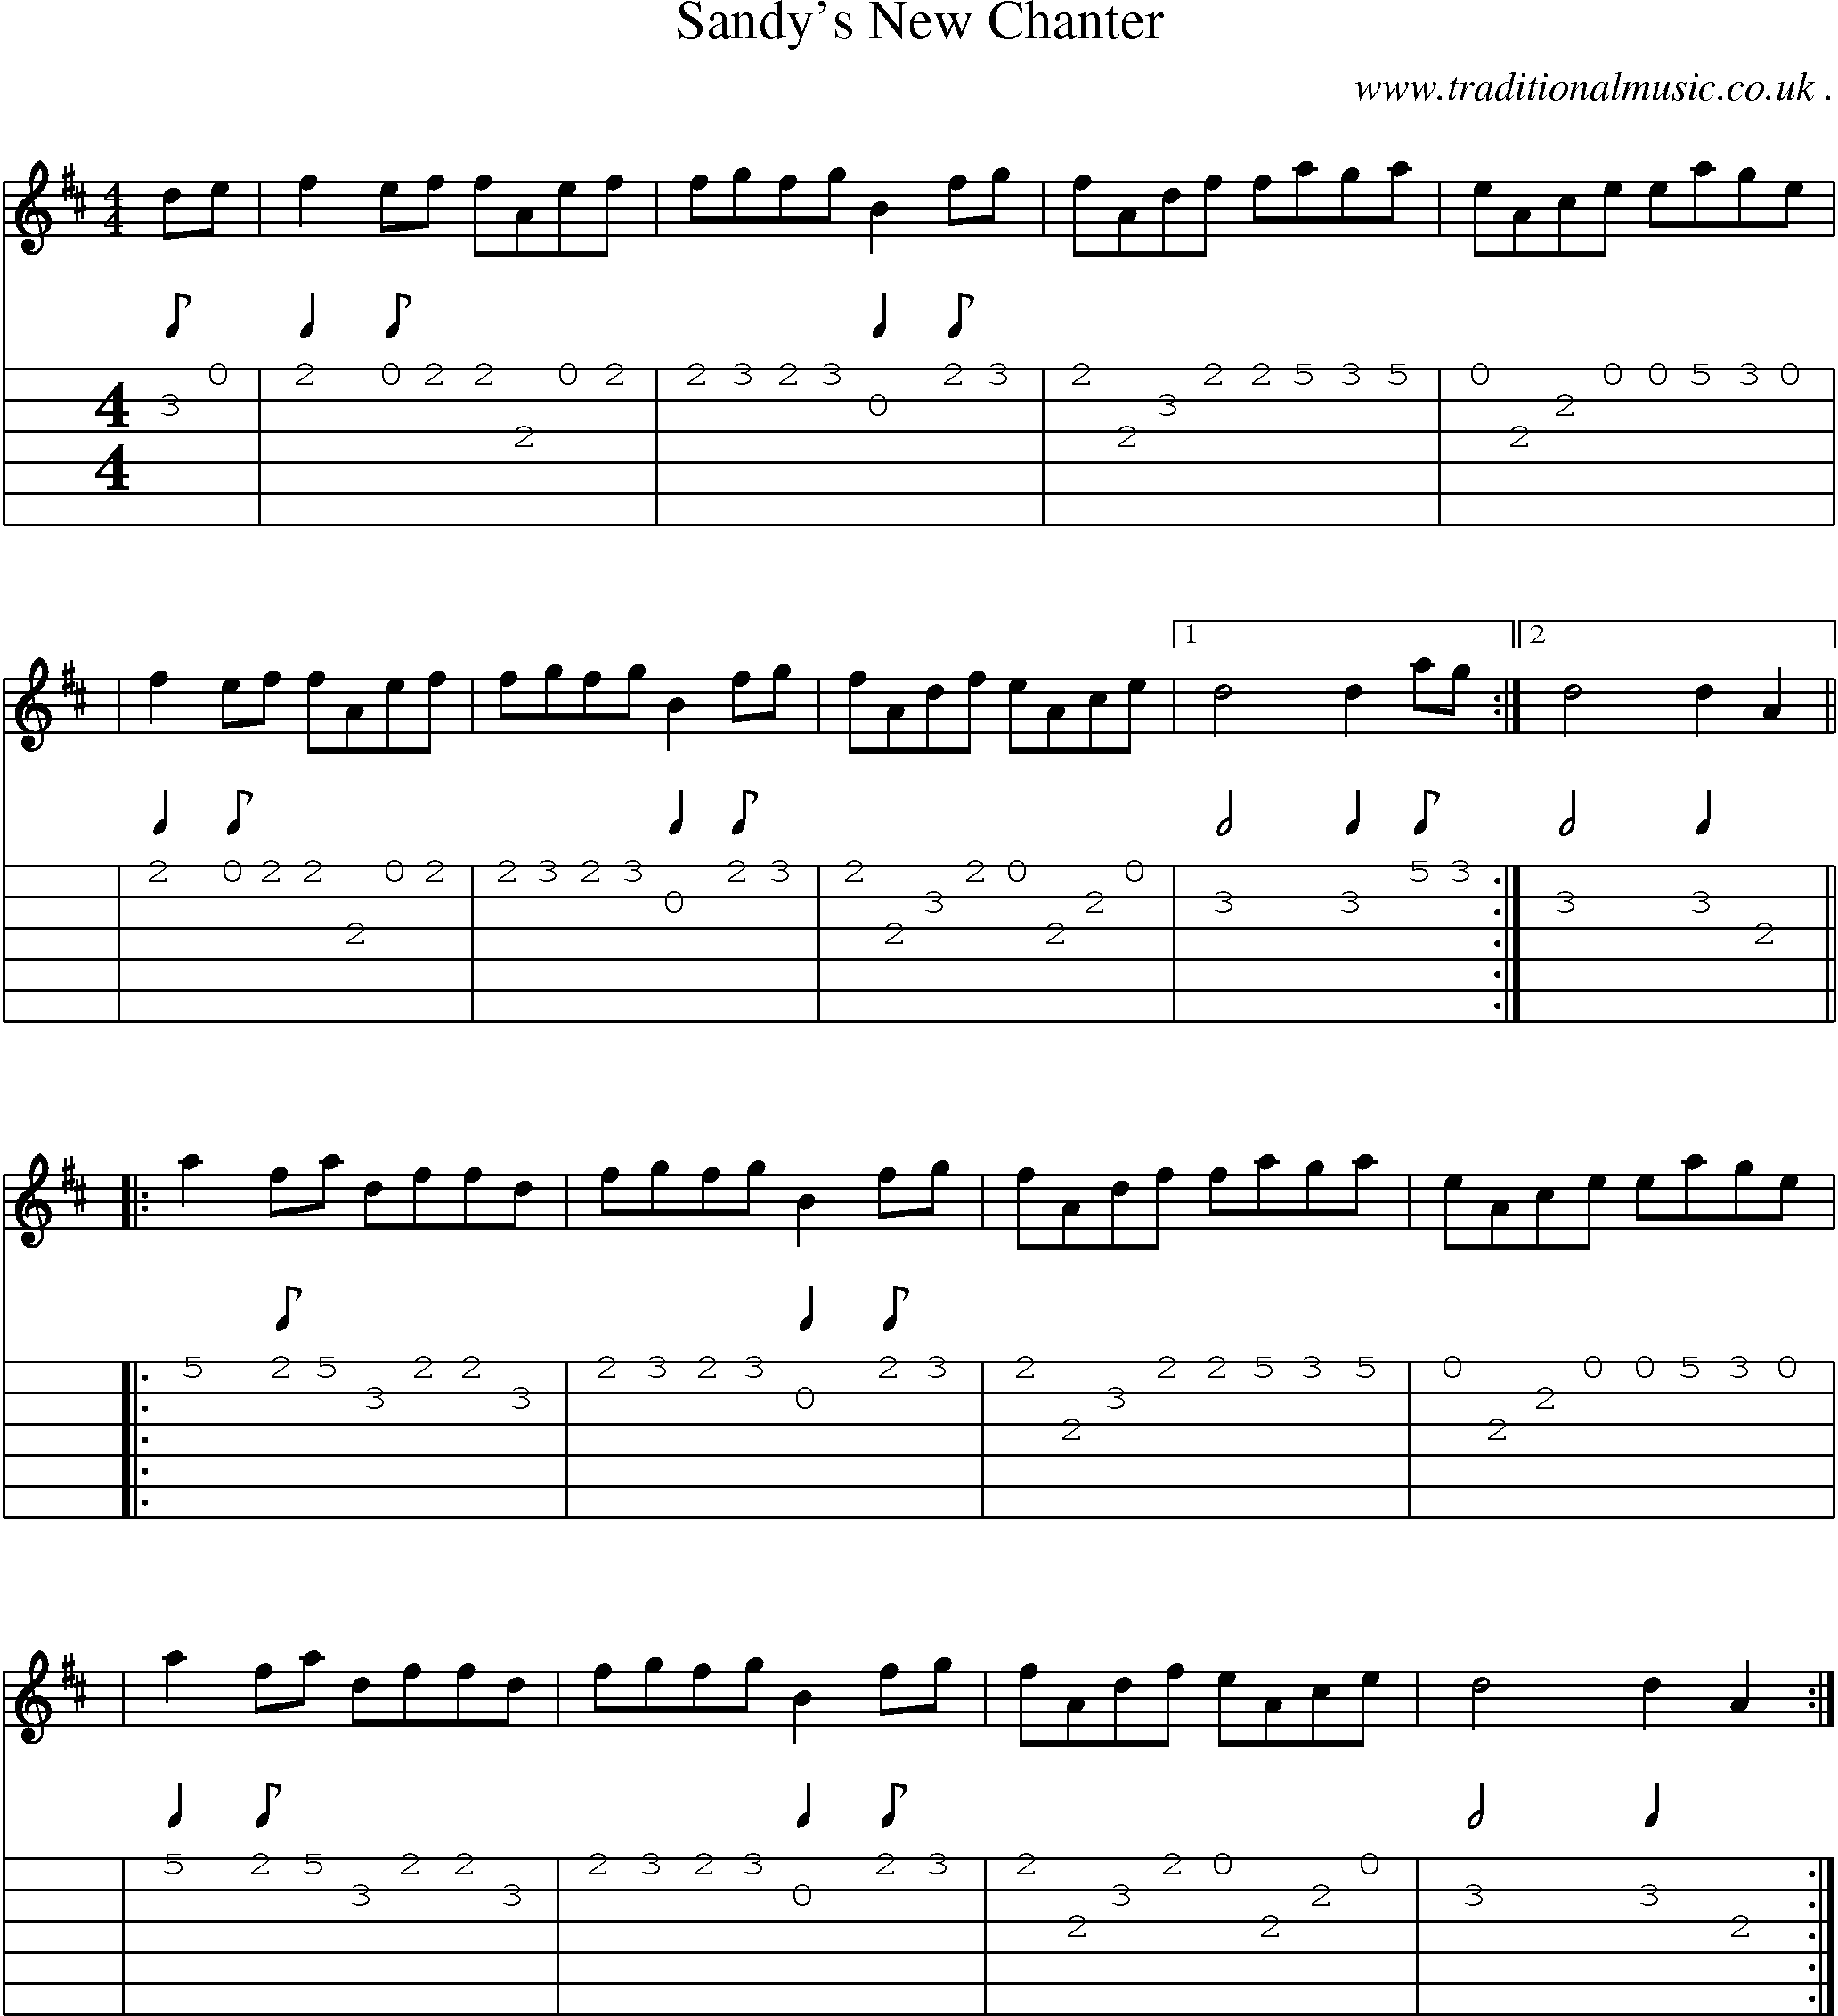 Sheet-music  score, Chords and Guitar Tabs for Sandys New Chanter